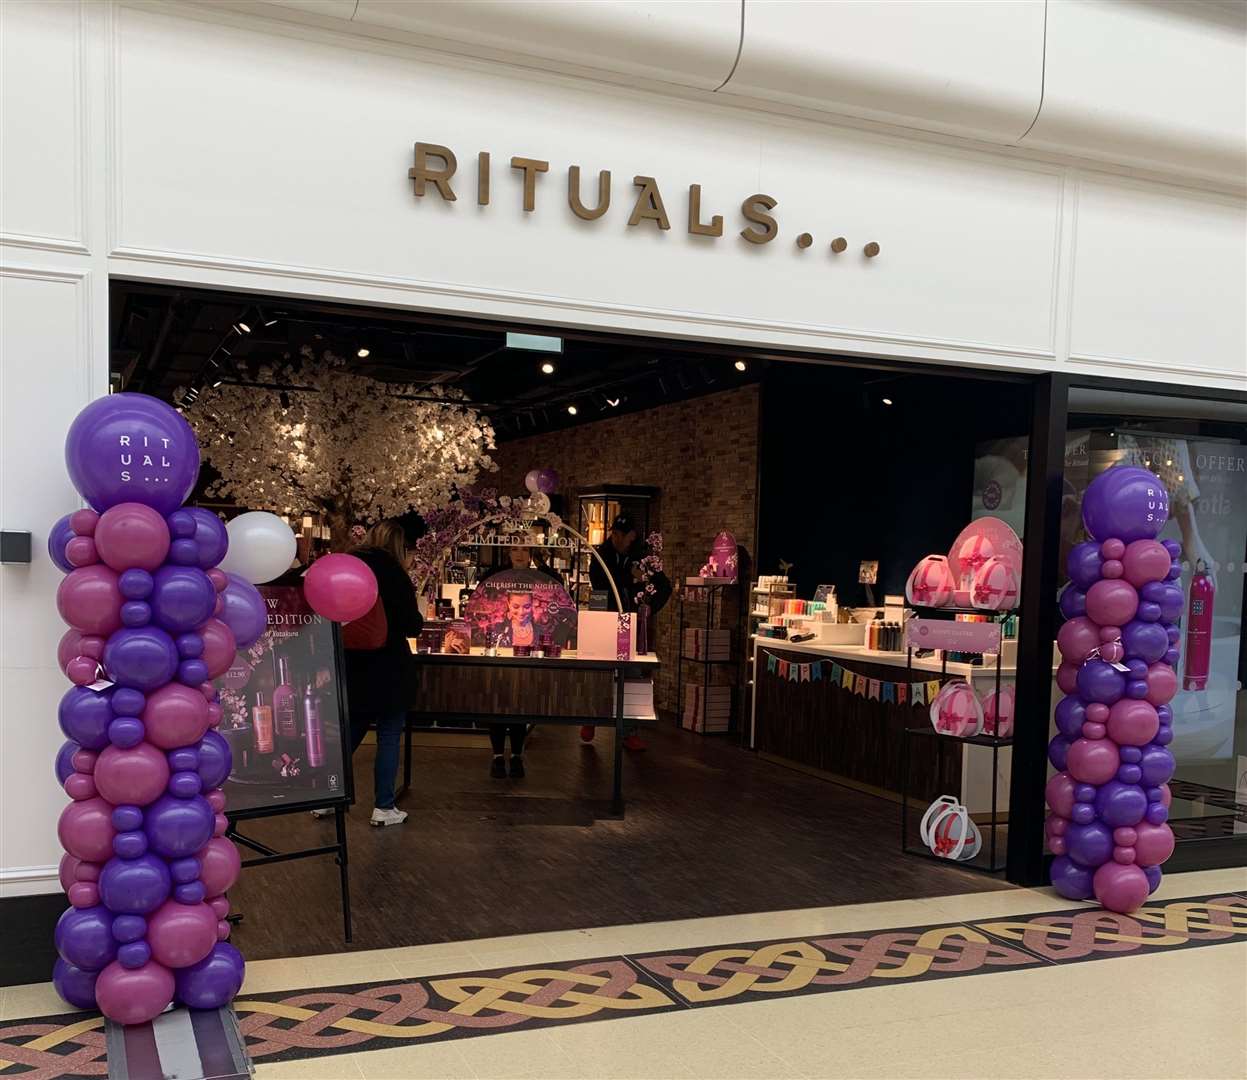 Rituals store ready for the party today.